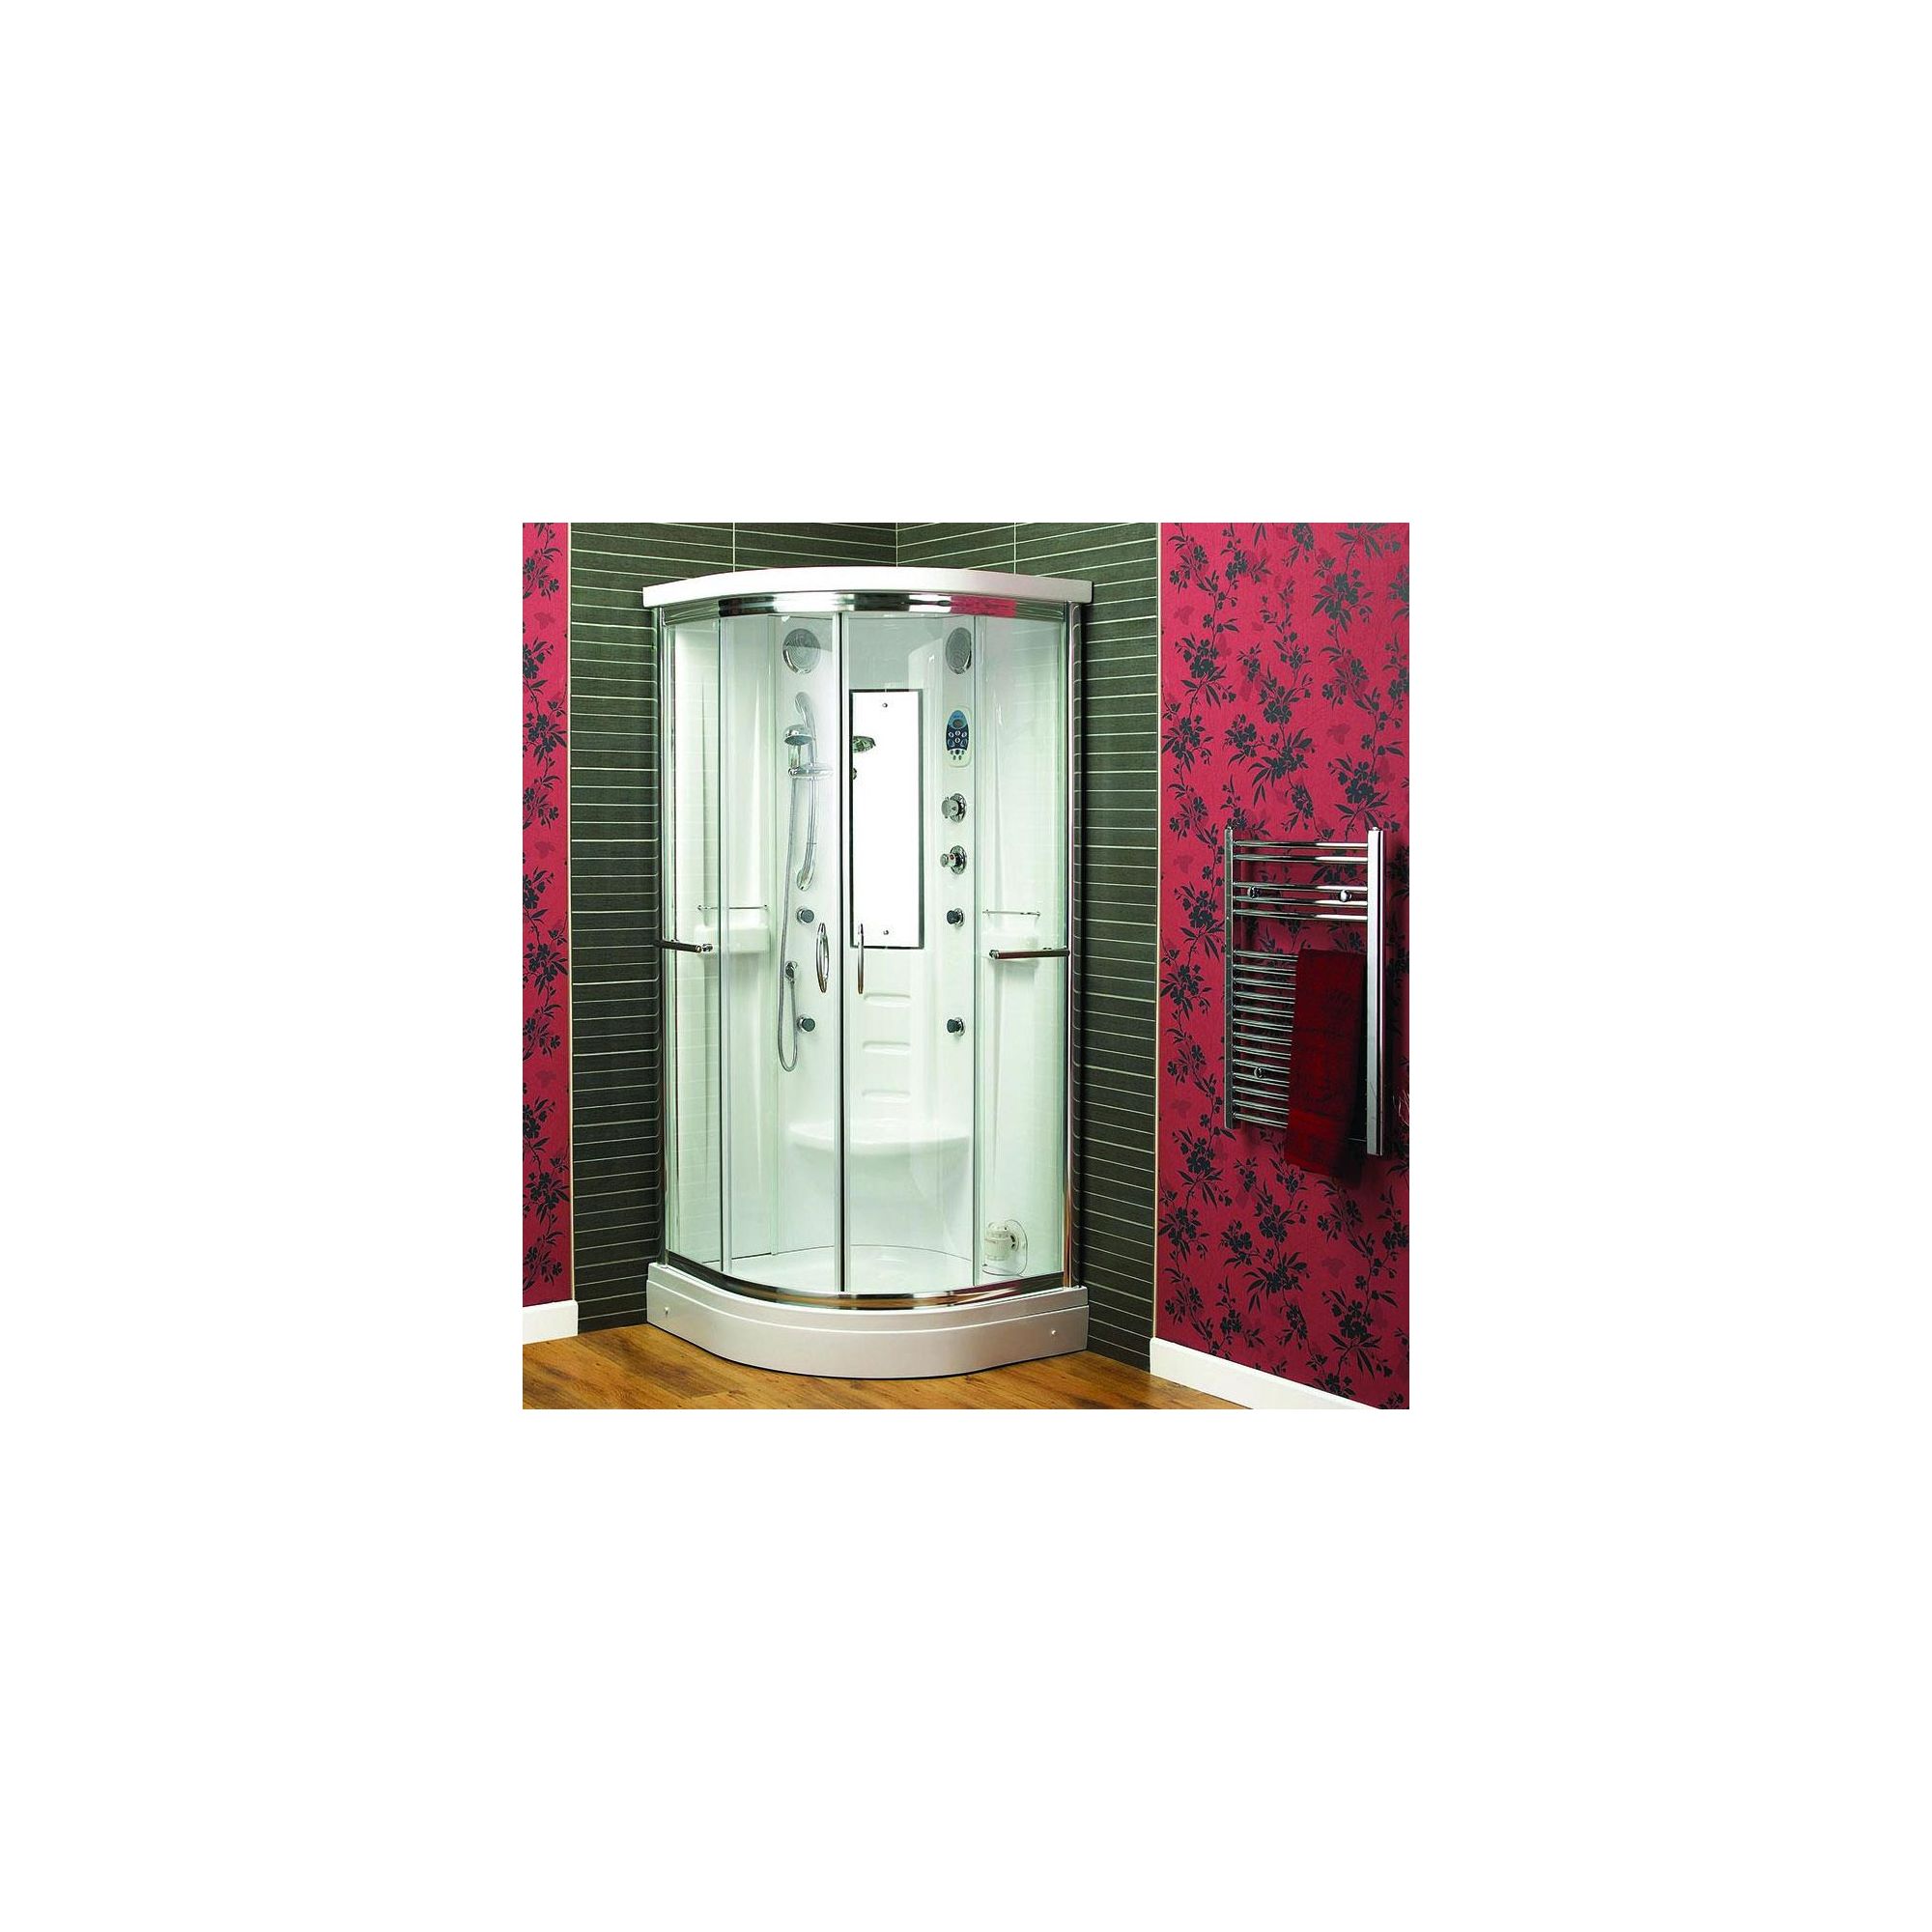 Aqualux Florenta Quadrant Steam and Shower Cabin, 900mm x 900mm, Polished Silver Frame, 5mm Glass at Tesco Direct